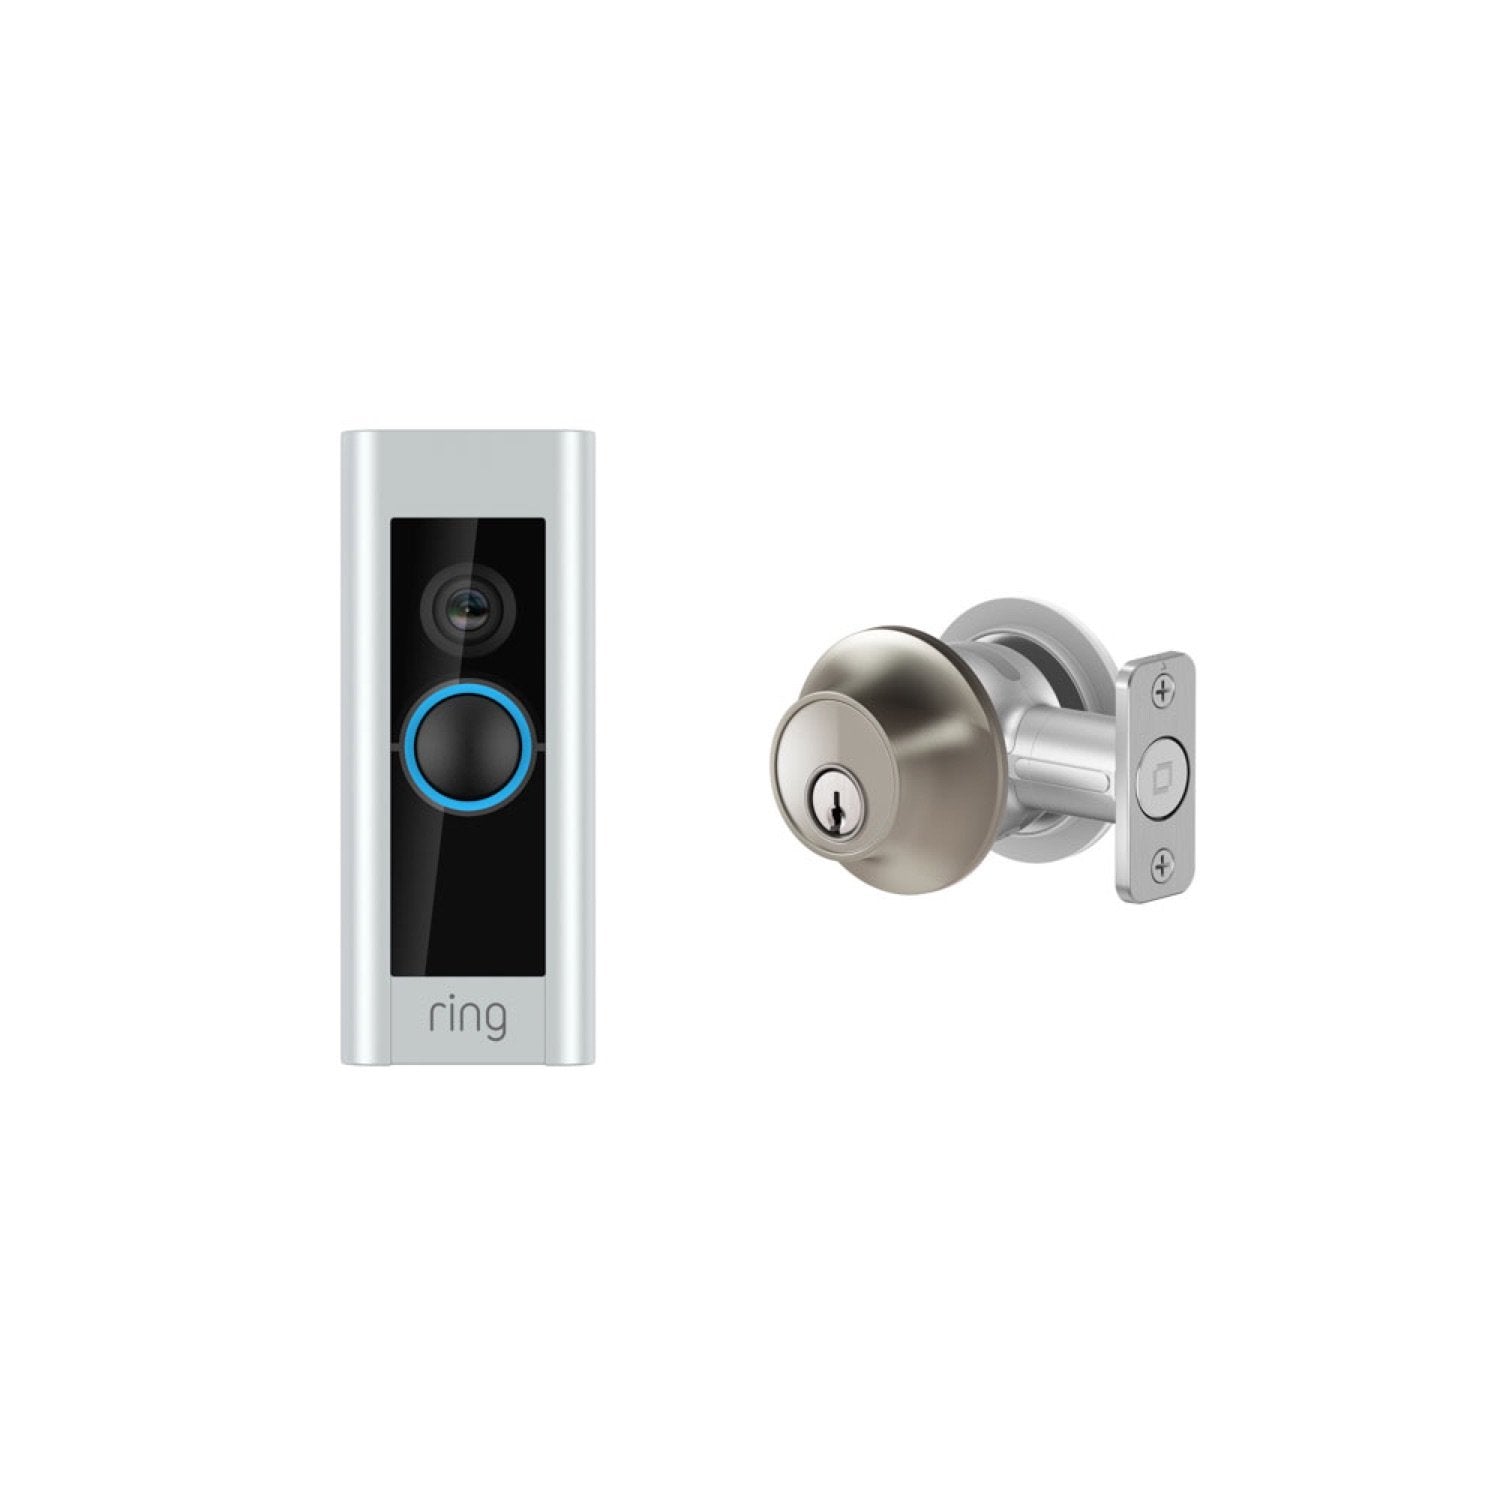 Wired Doorbell Plus (Video Doorbell Pro) and Level Lock - Touch Edition - Satin Nickel